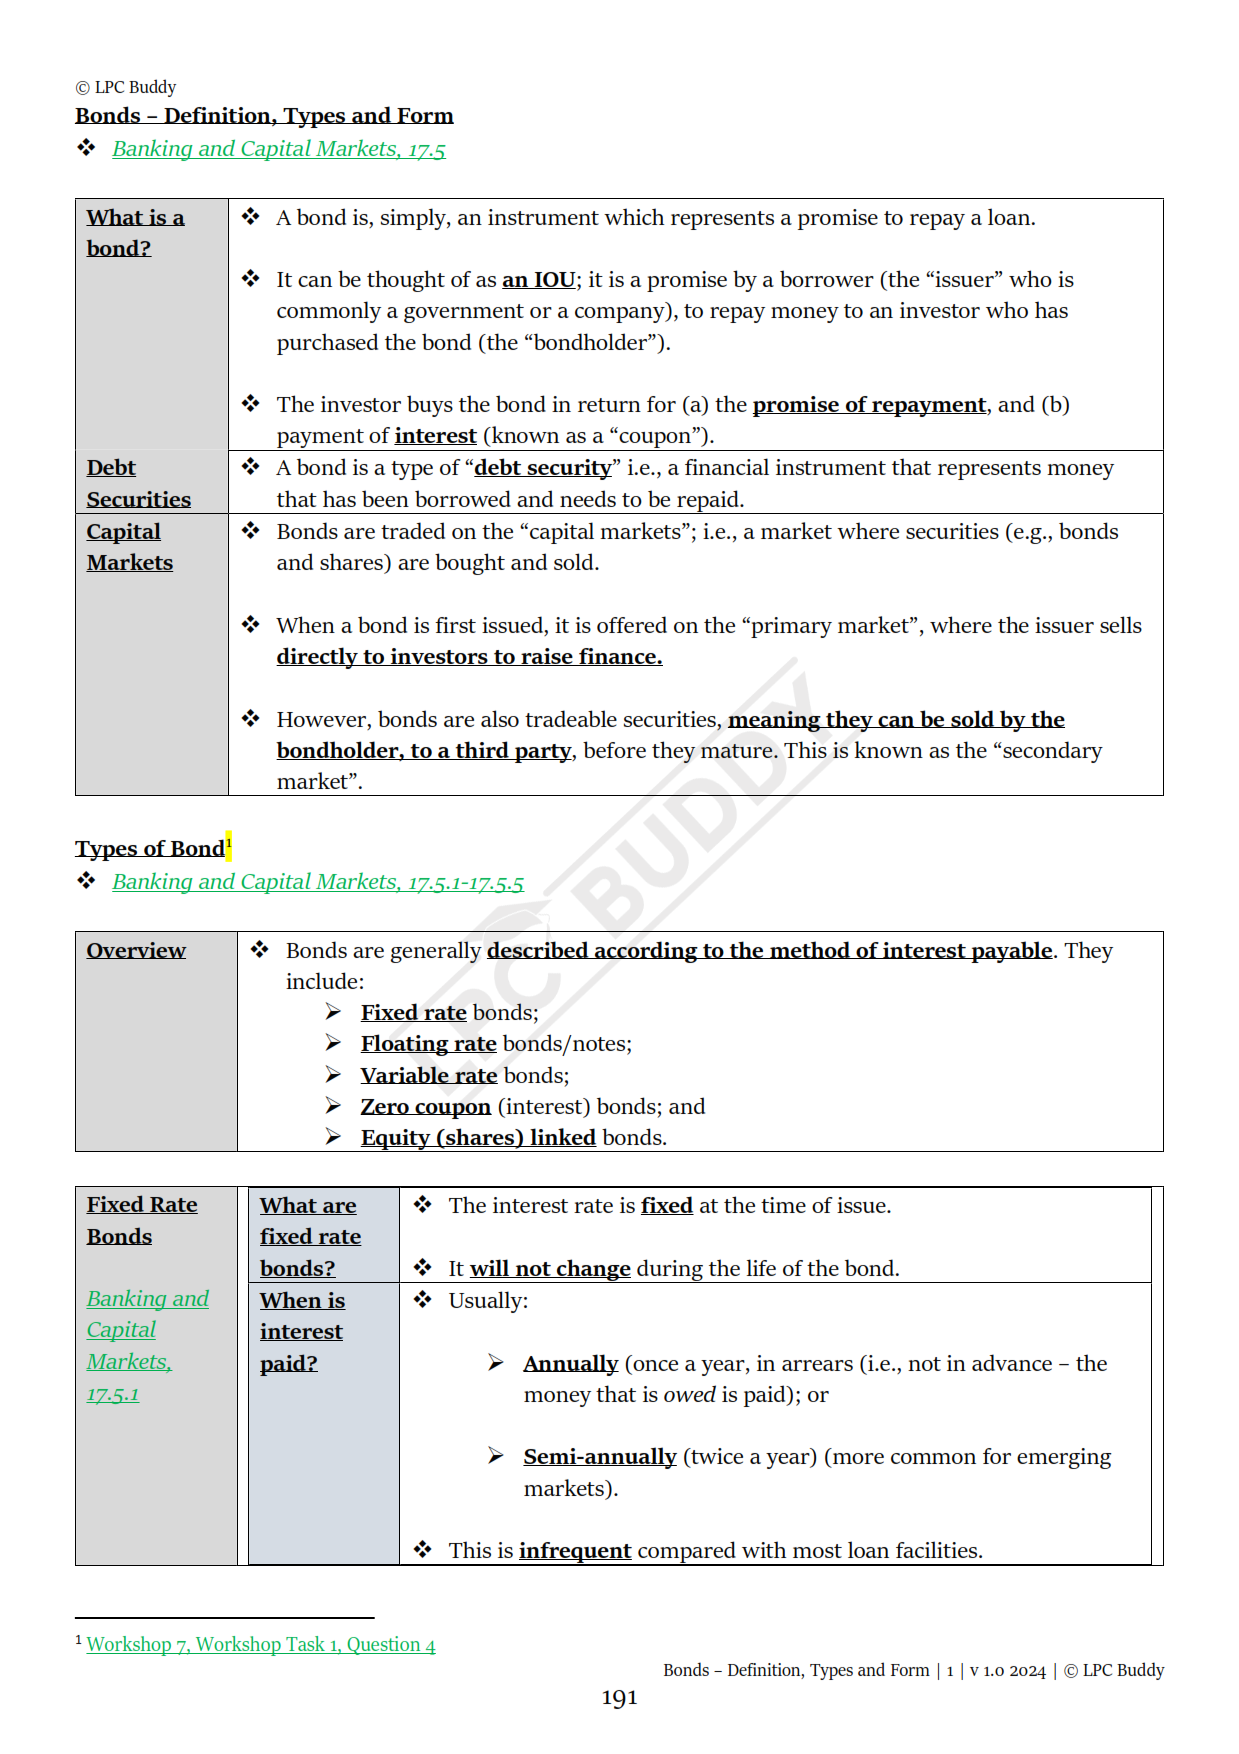 LPC Buddy™ 2024 | Banking & Debt Finance | Distinction Level Study Guide for the LPC (Electronic)